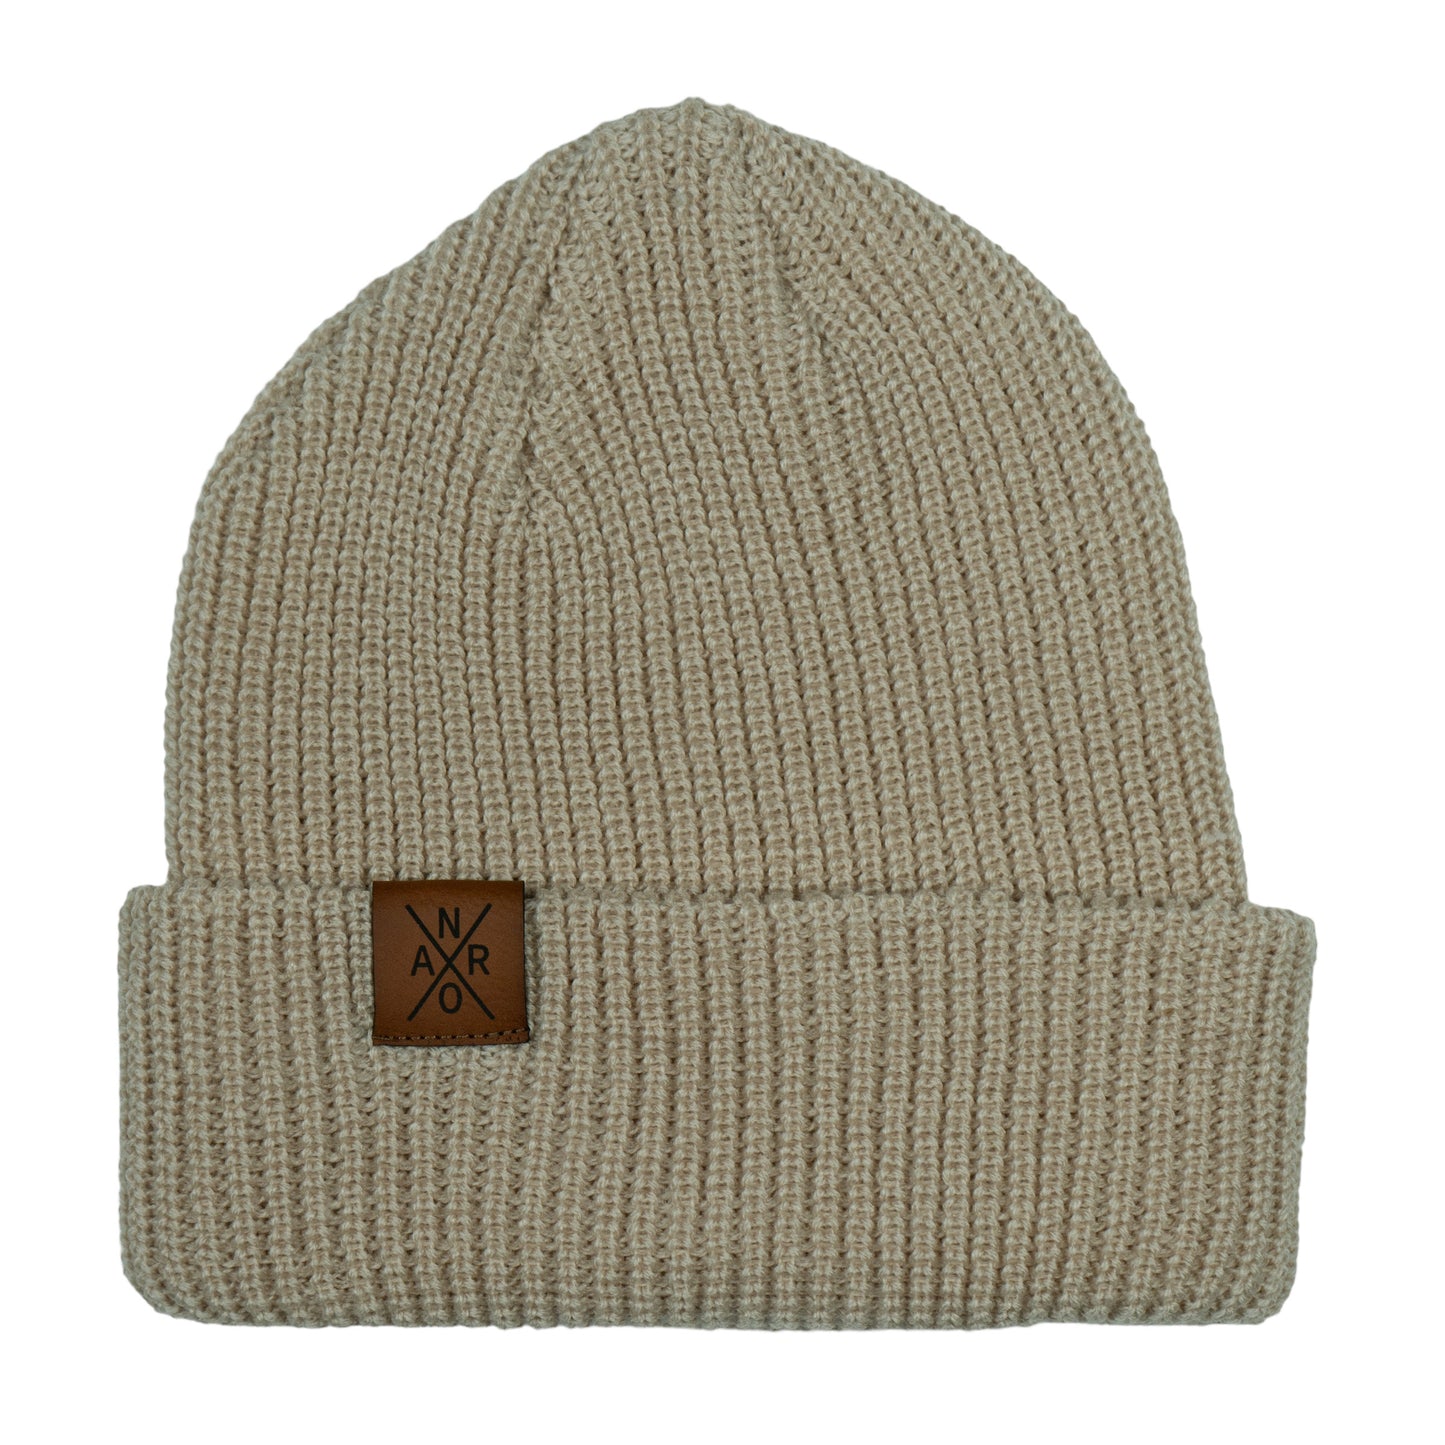 Tuque 2.0 - Sable